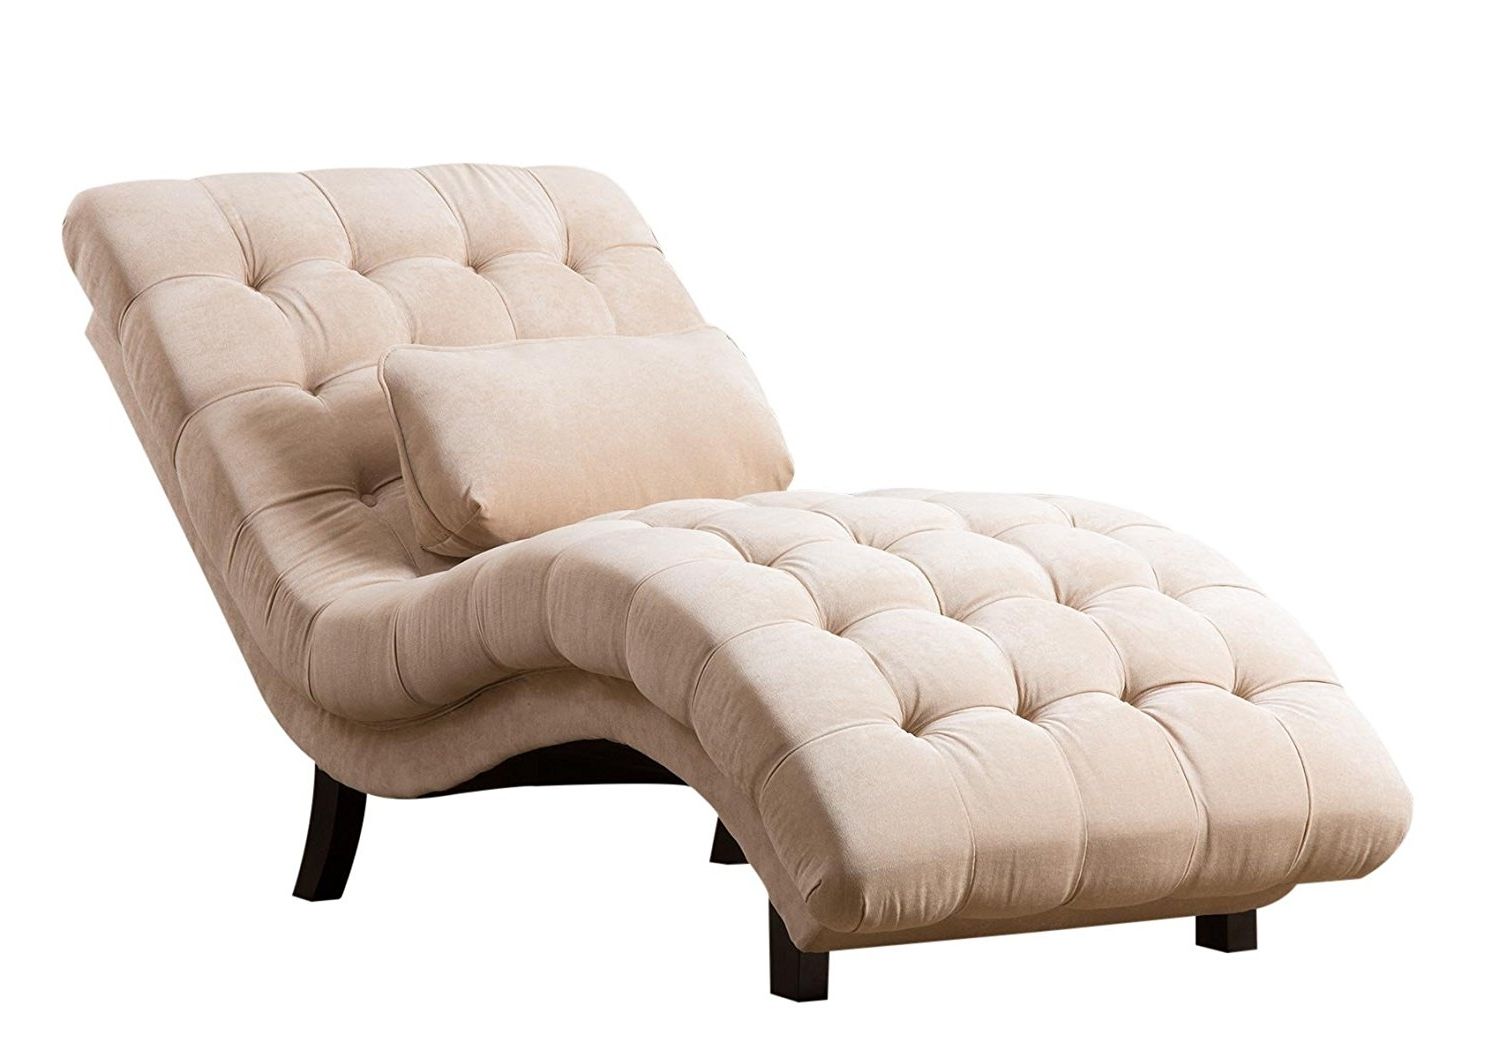 Upholstered Chaise Lounges Within Most Recently Released Amazon: Abbyson Carmen Cream Fabric Chaise: Home & Kitchen (View 7 of 15)